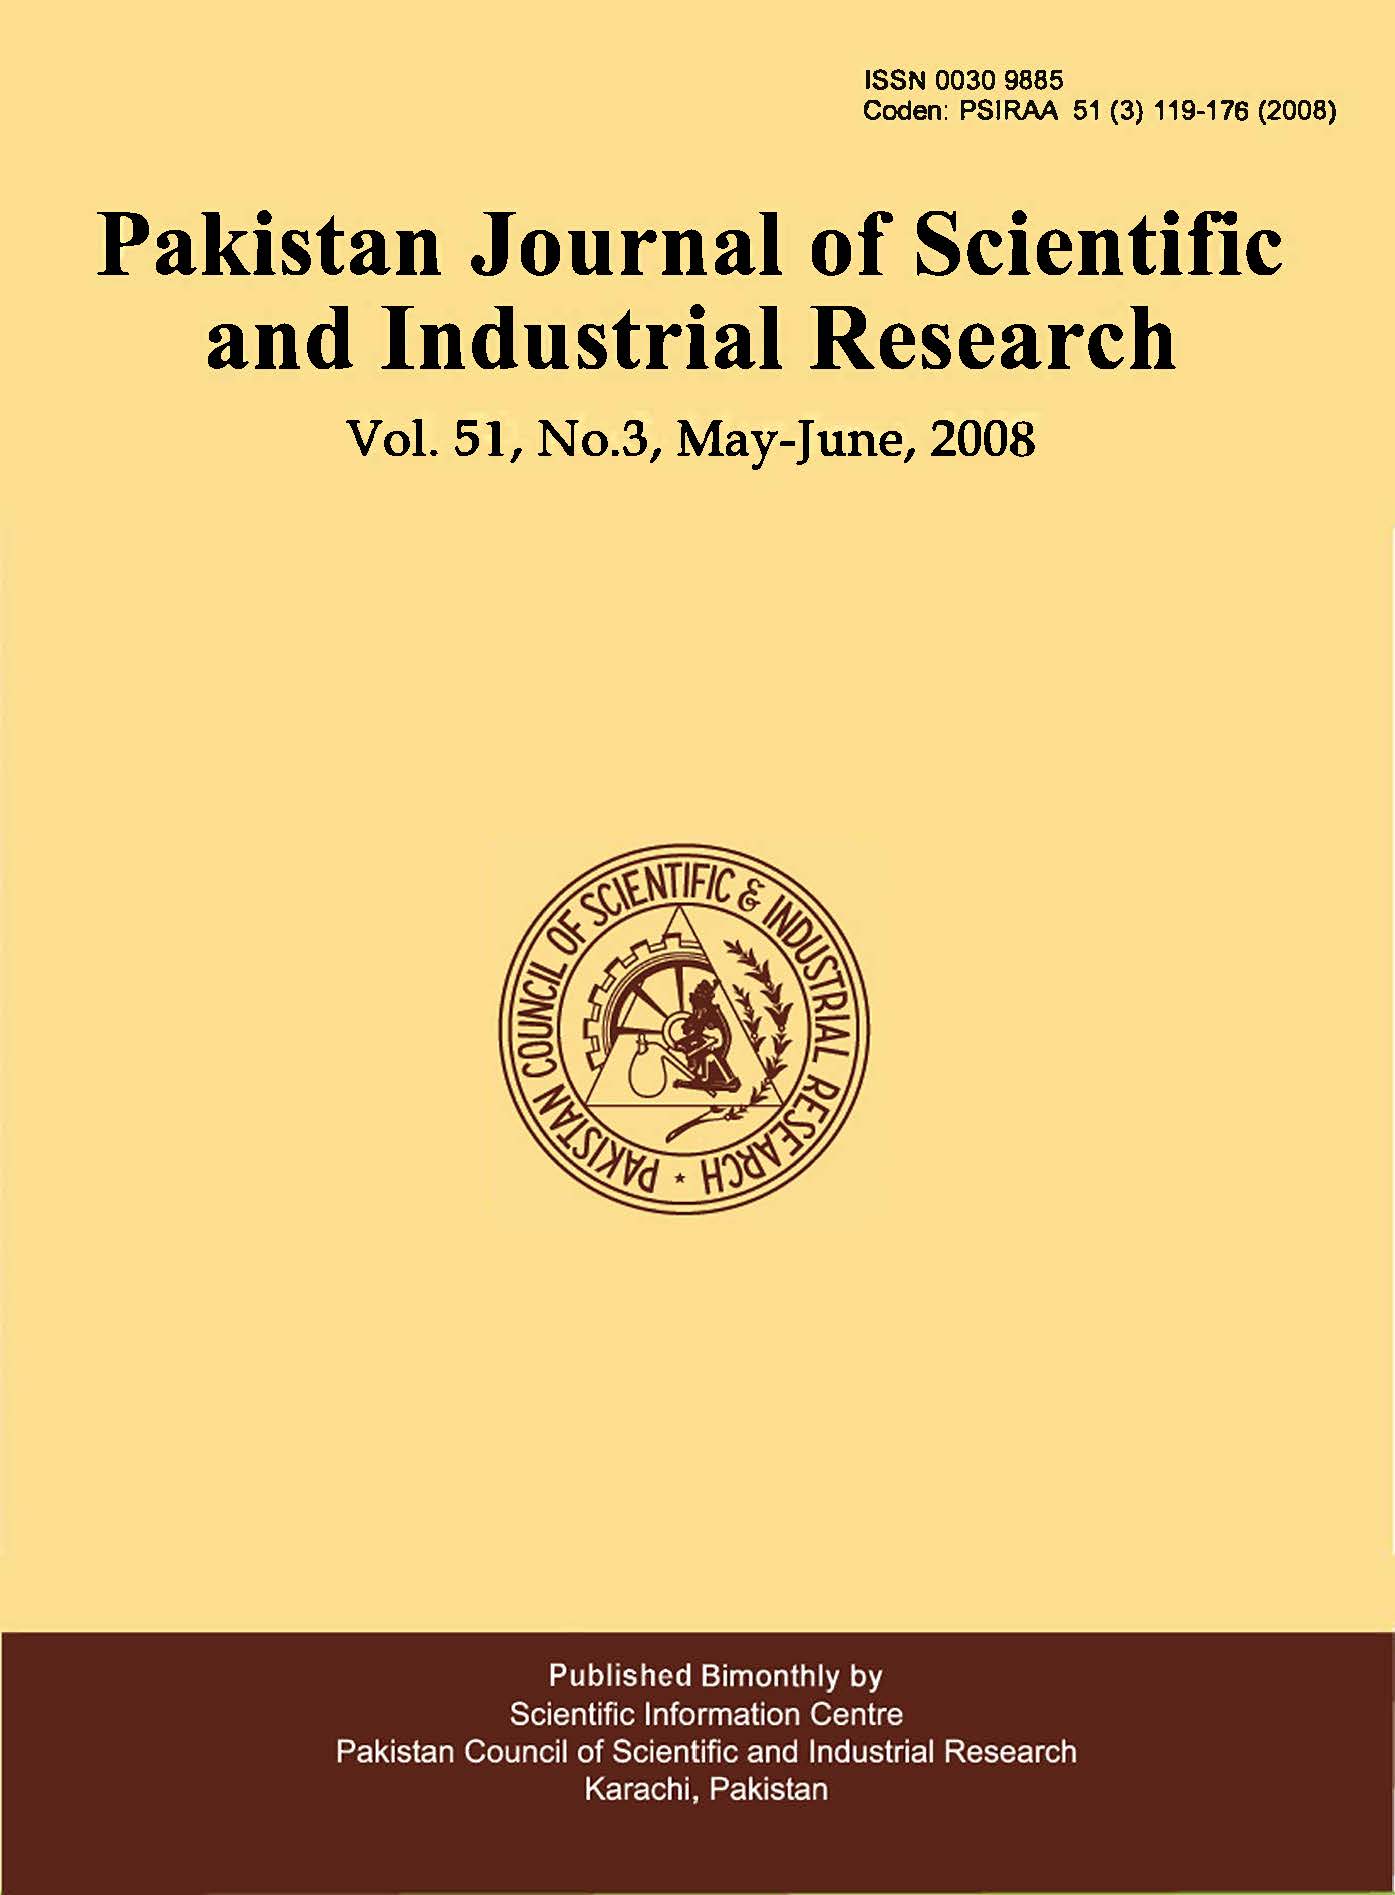 					View Vol. 51 No. 3 (2008): Pakistan Journal of Scientific and Industrial Research
				